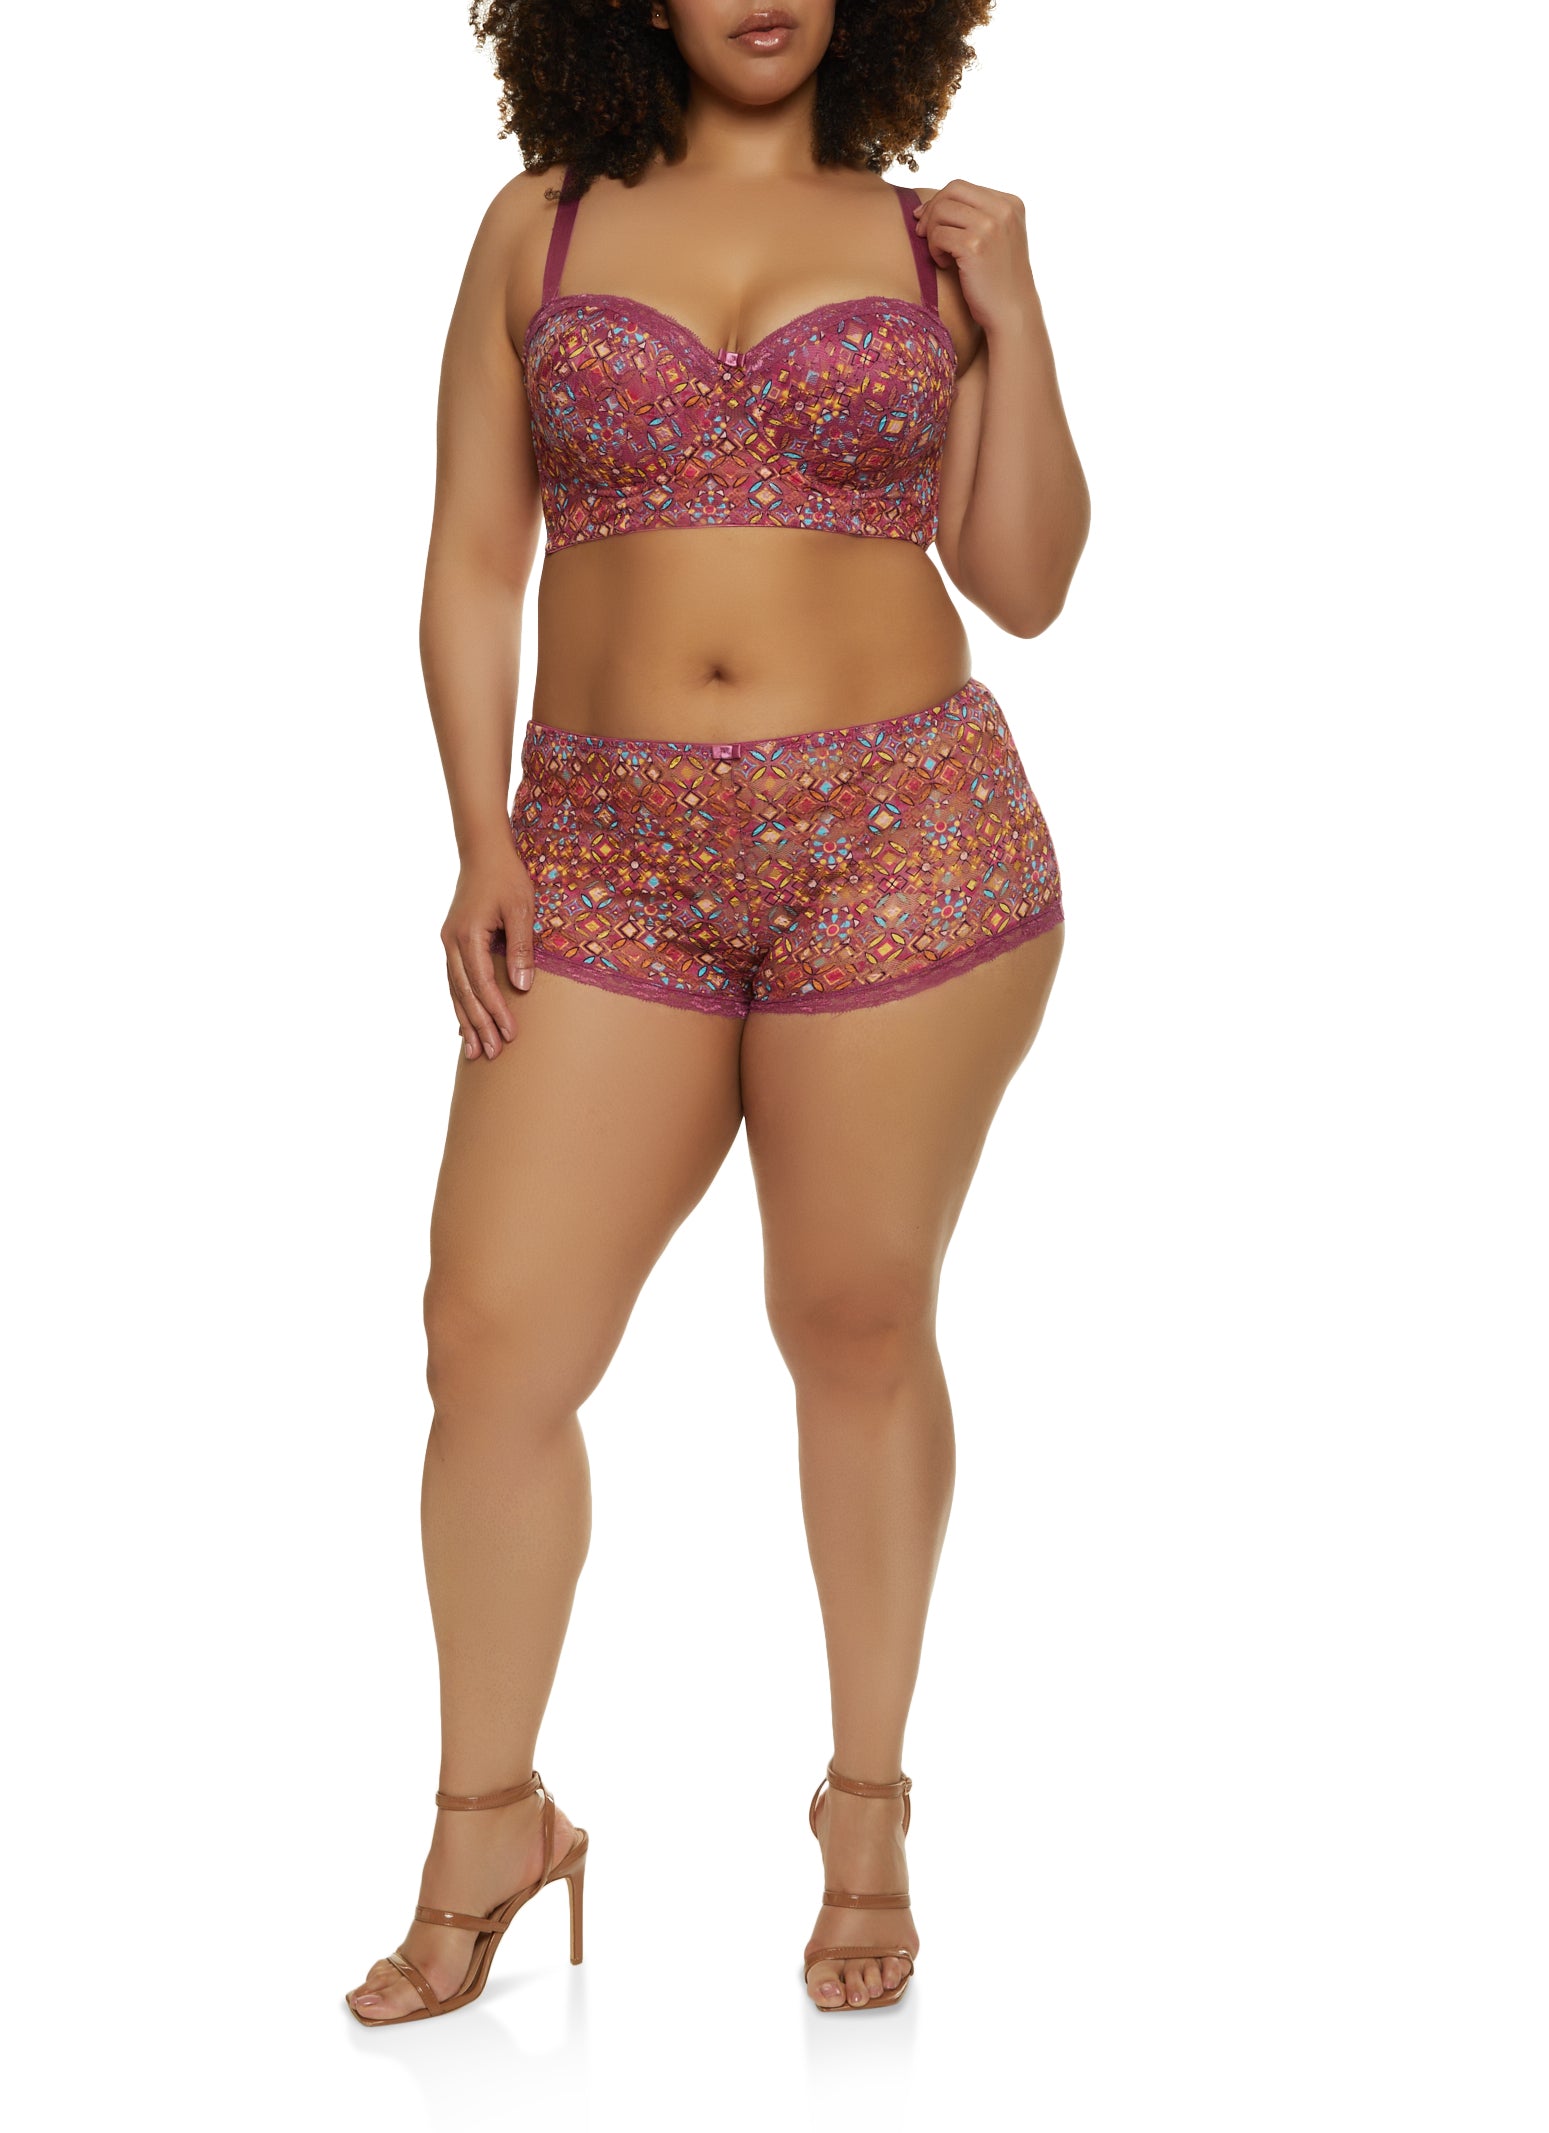 Plus Size Longline Lace Patterned Balconette Bra | Converts to Strapless